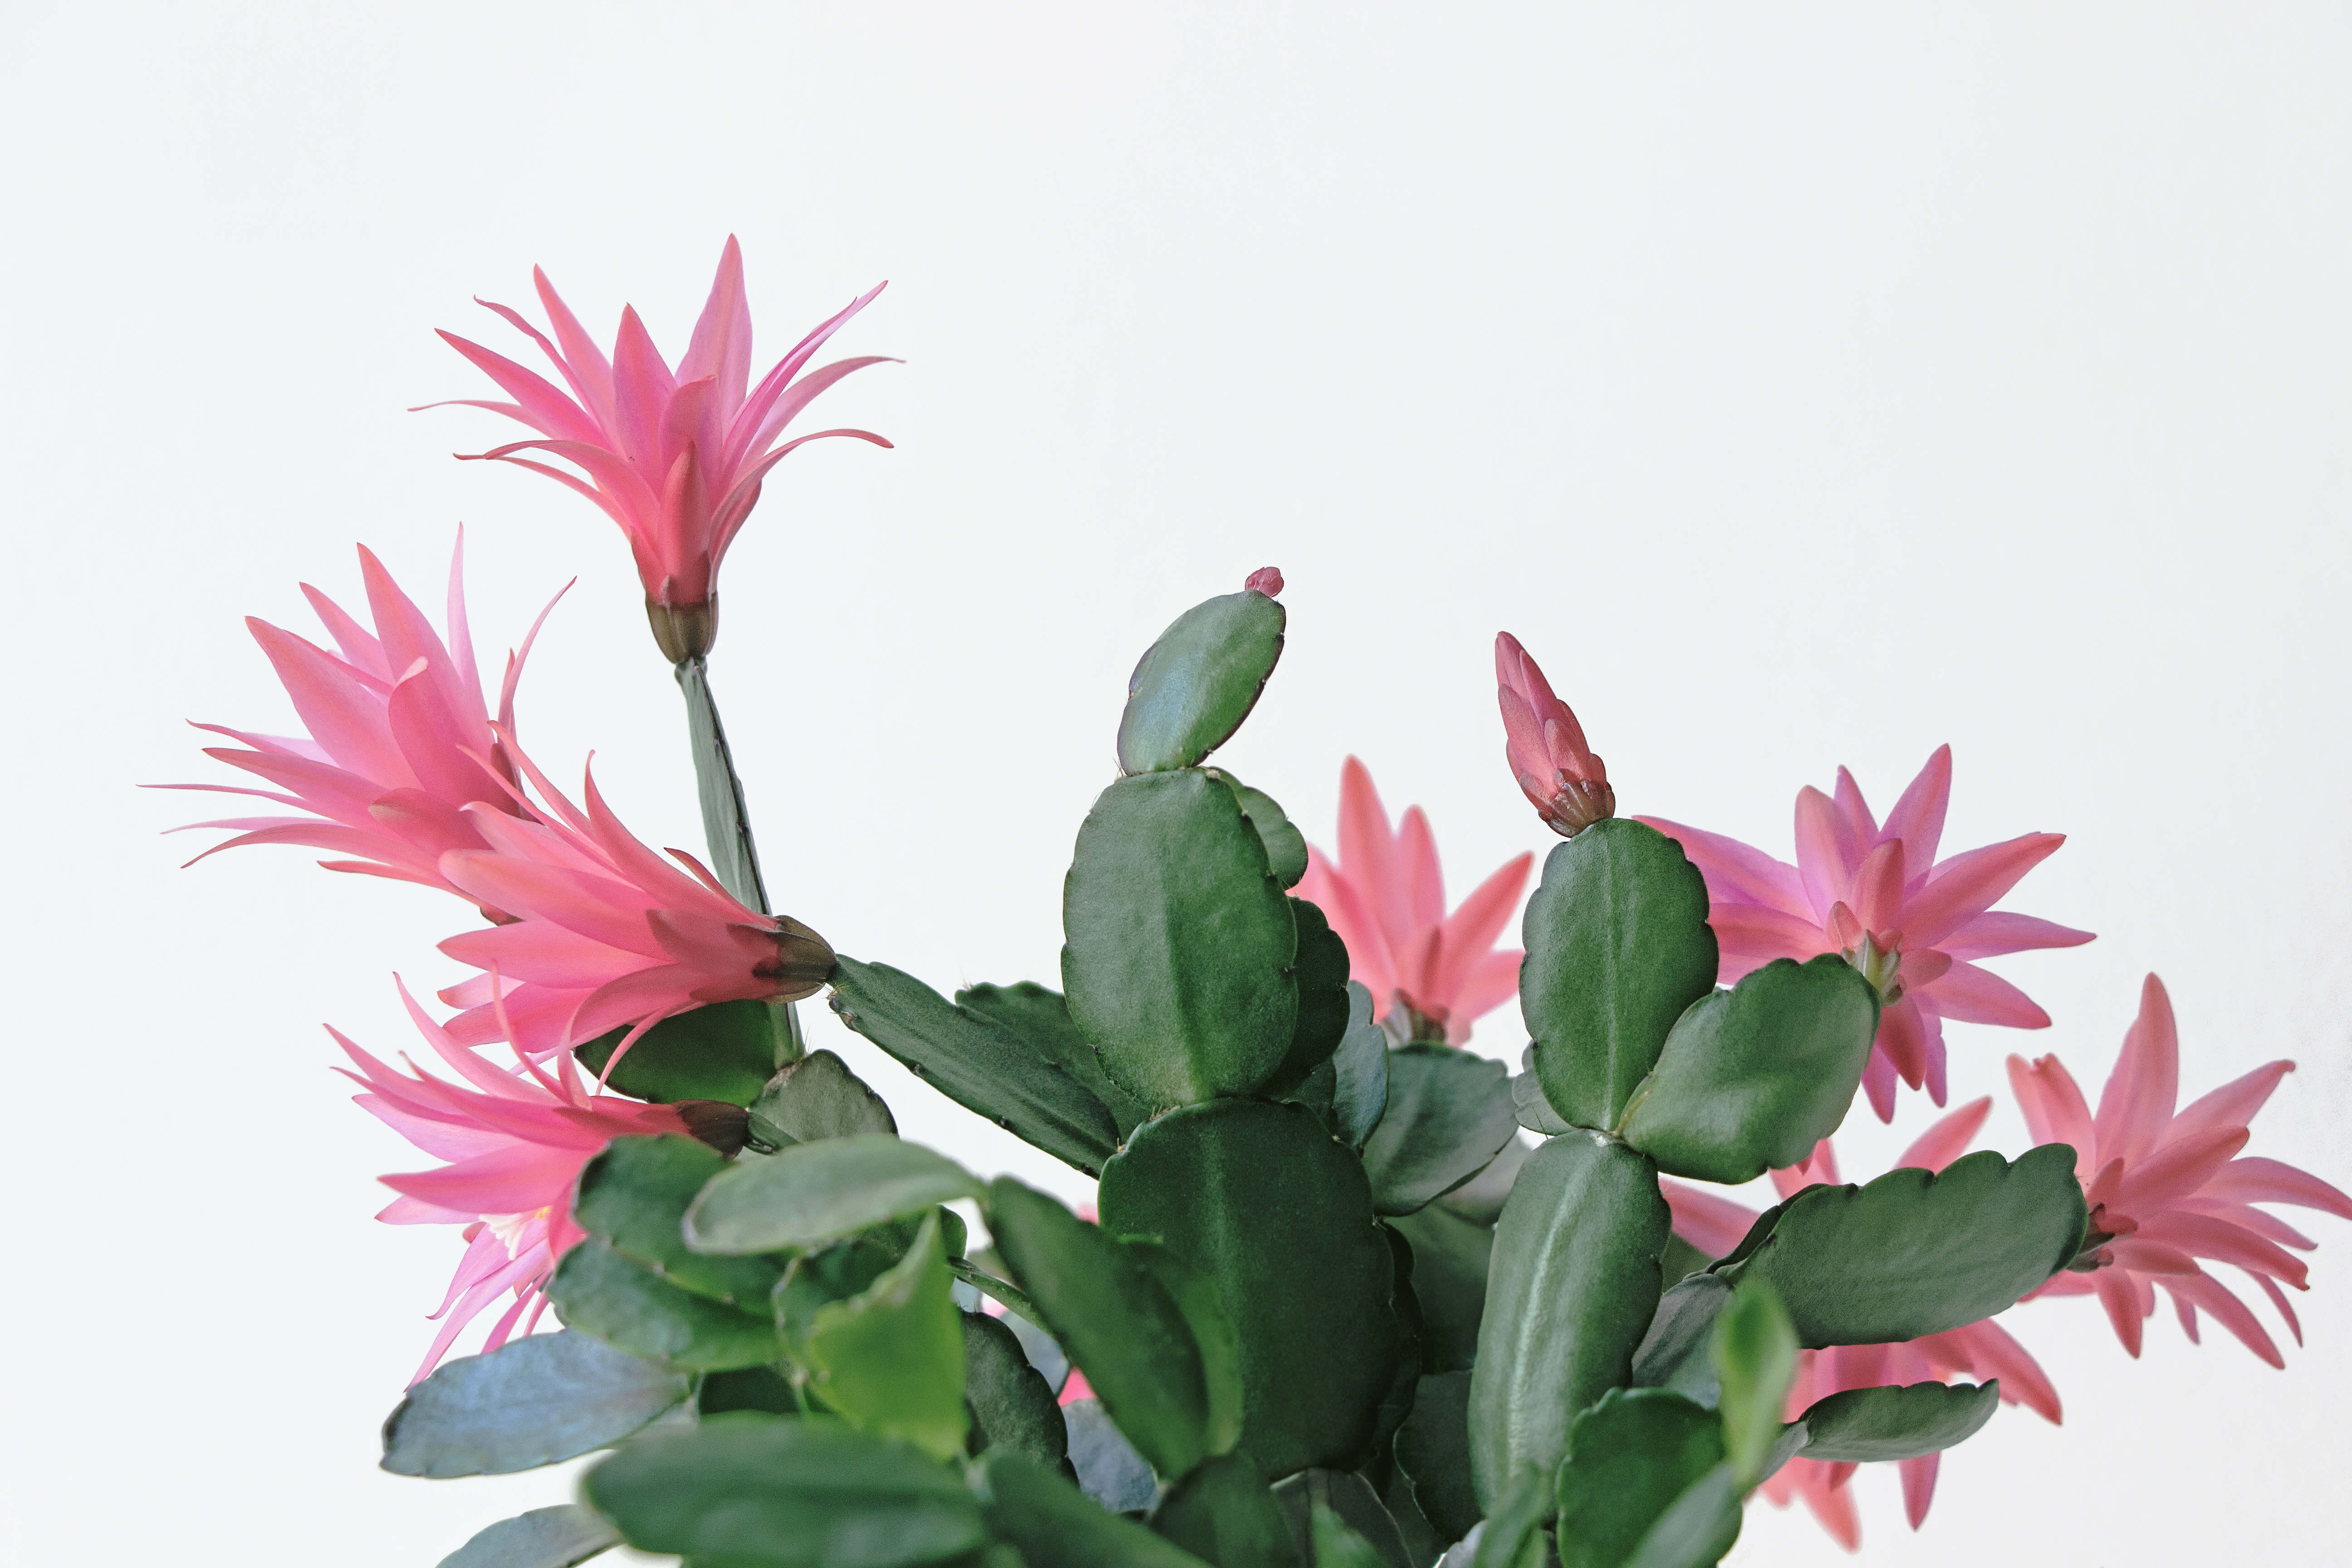 The Best Way to Water Your Easter Cactus